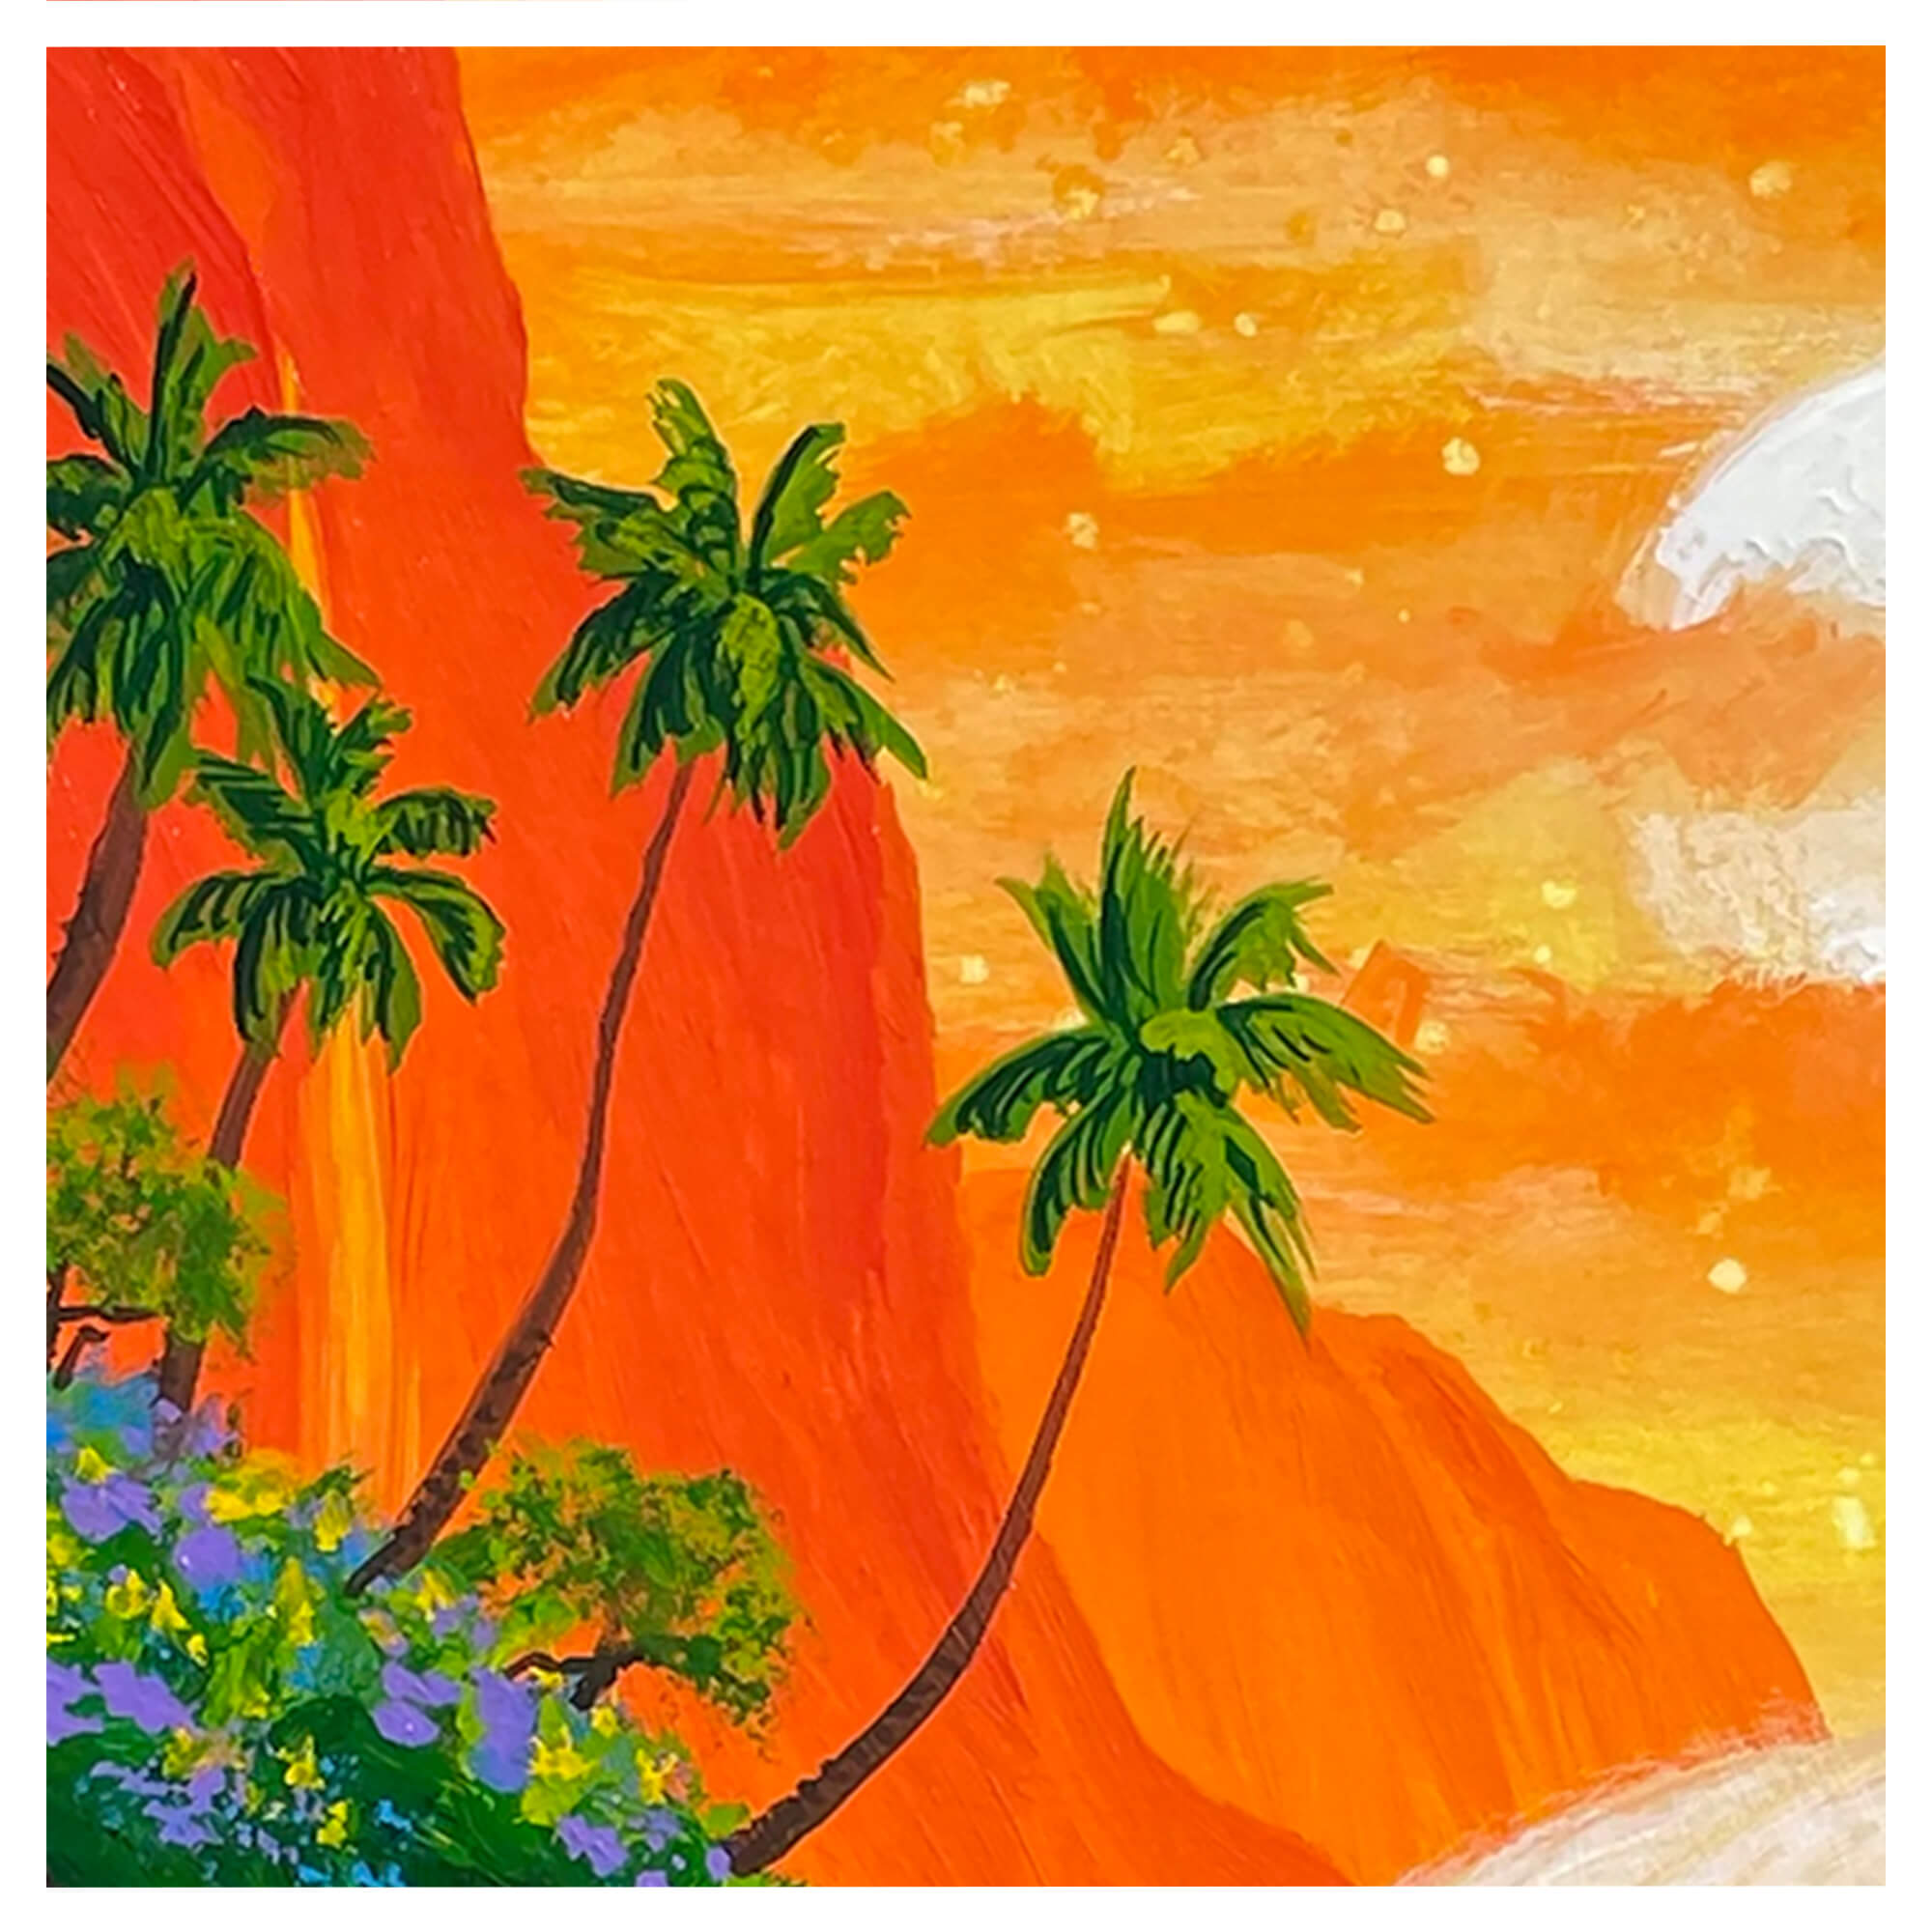 Palm trees and mountains of Hawaii by Hawaii artist Patrick Parker